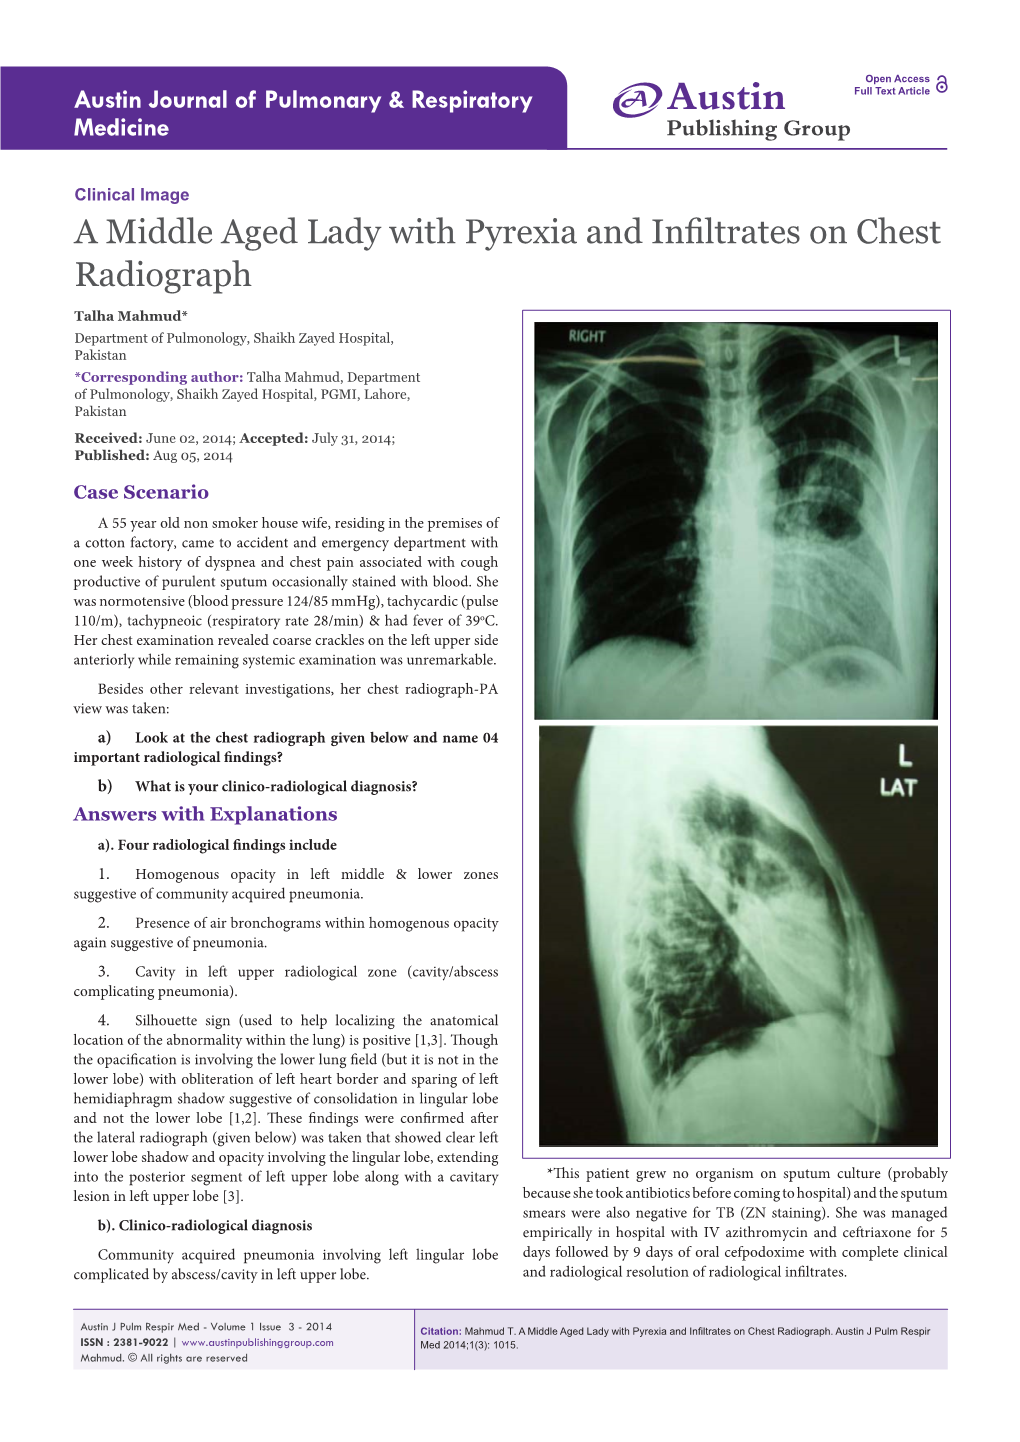 A Middle Aged Lady with Pyrexia and Infiltrates on Chest Radiograph